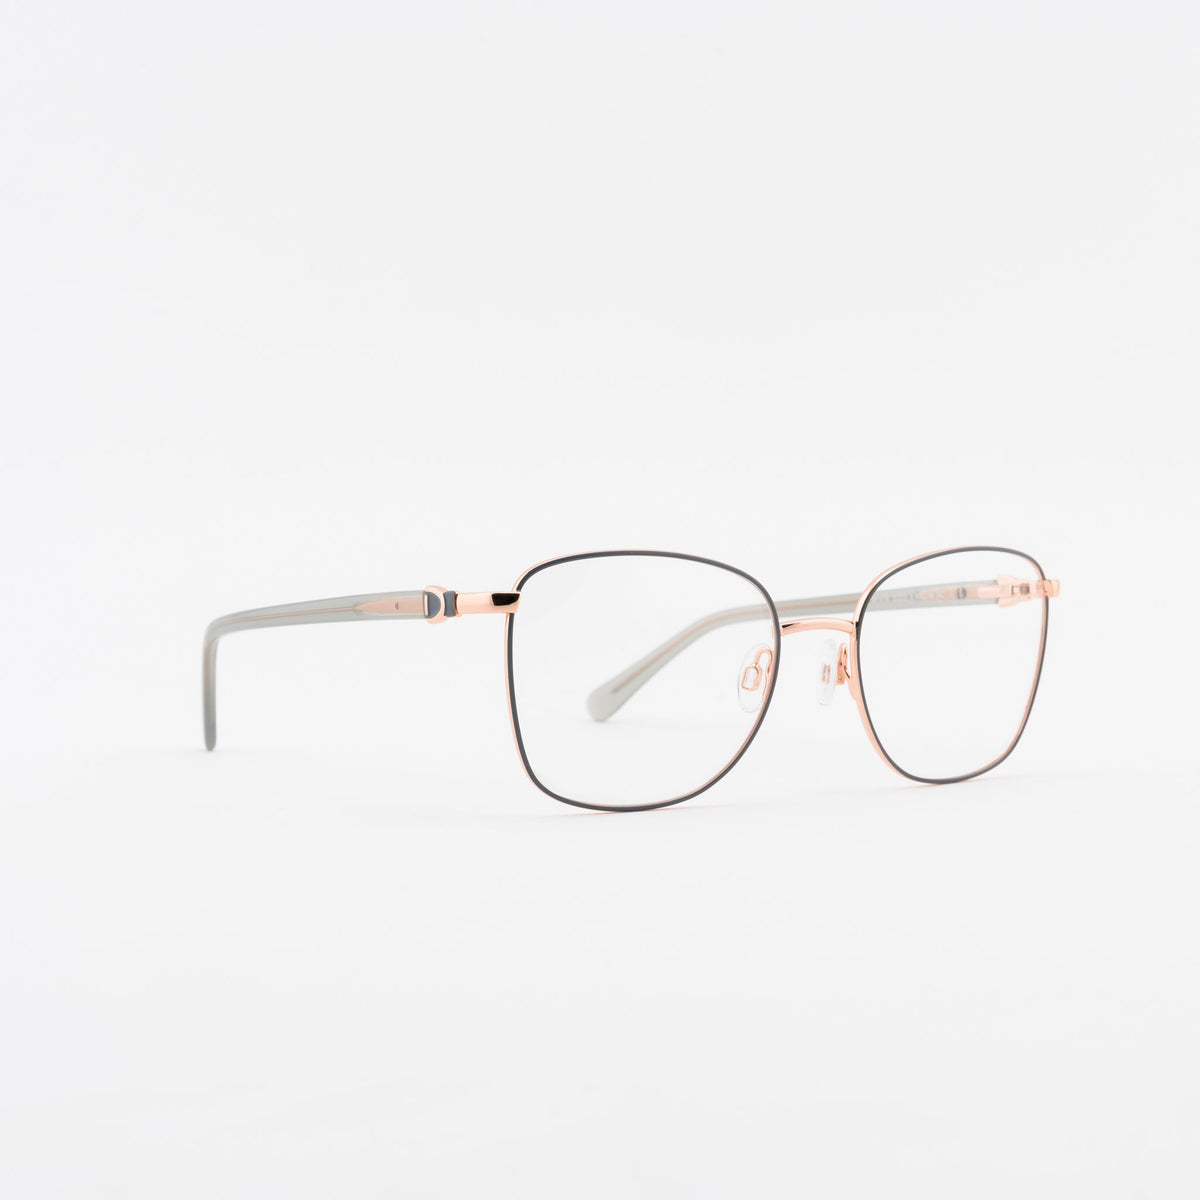 Superflex SF-574 Frames Superflex 53 S203 - GREY ROSE GOLD Not Available